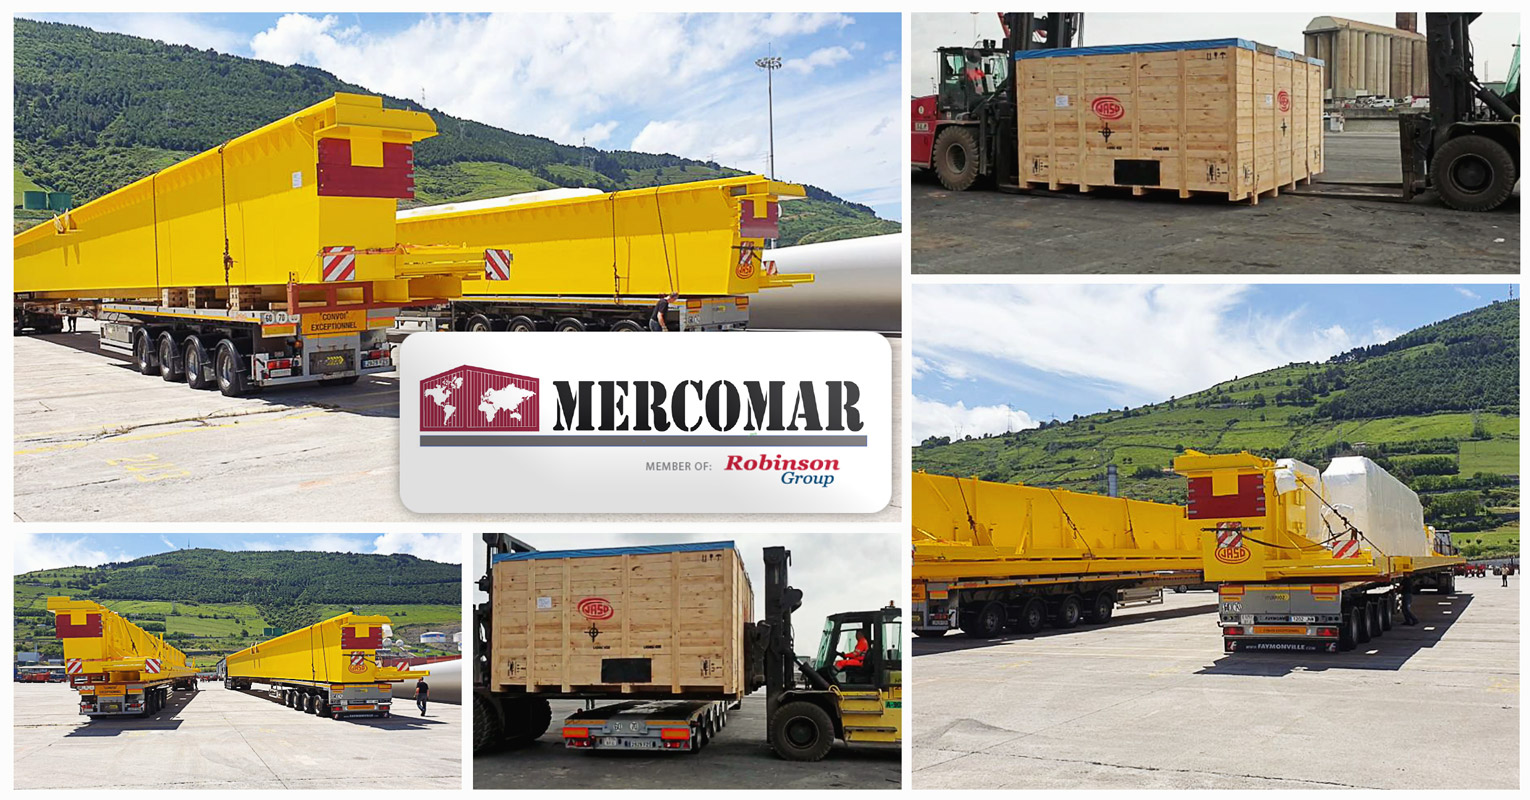 Mercomar (Robinson Group) Transported the First of Seven Gantry Cranes from Spain to Mexico